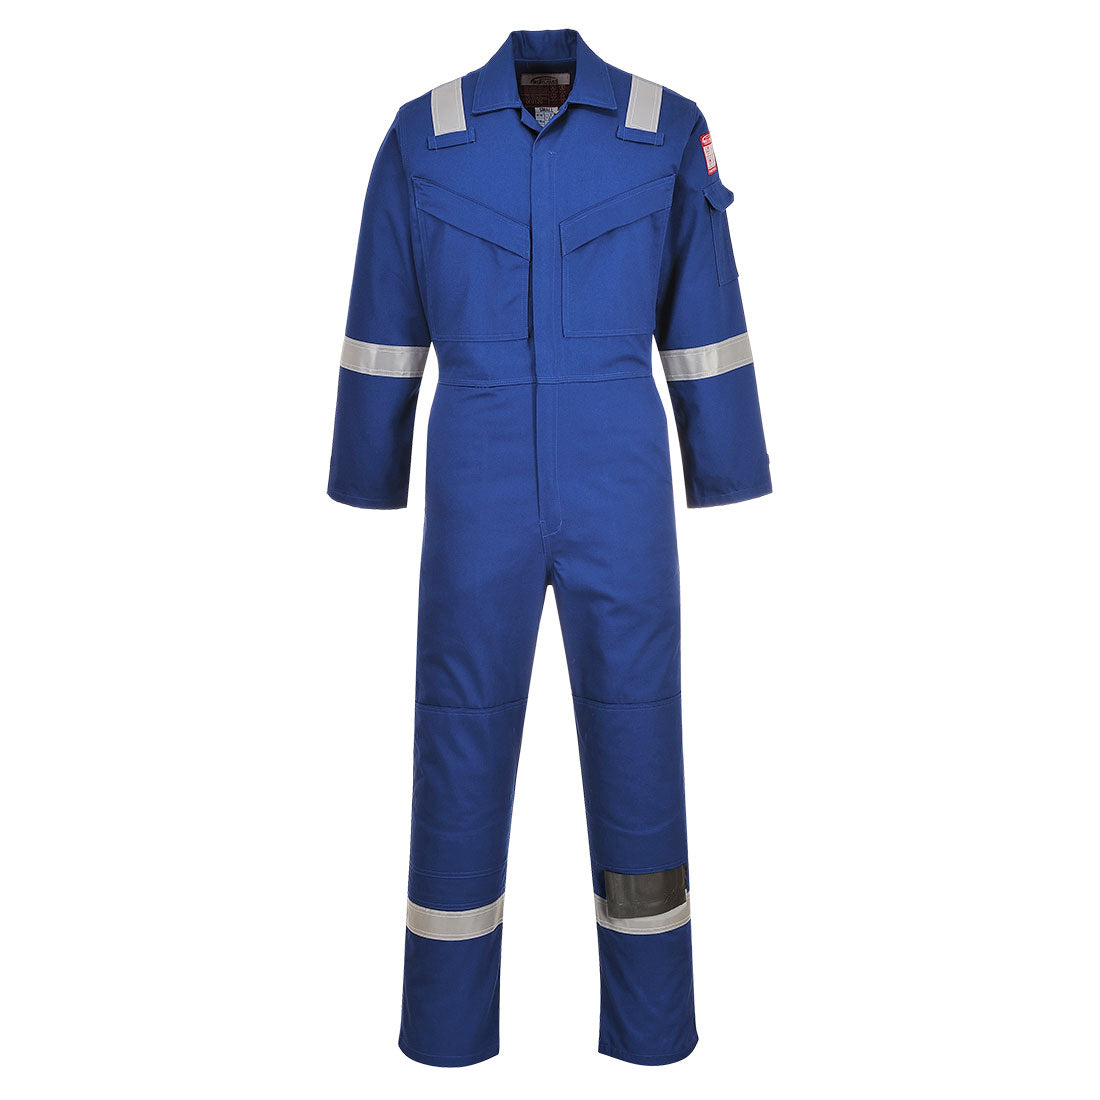 Portwest FR50 Royal Blue Sz XL Tall Flame Resistant Anti-Static Boiler Suit Coverall Overall